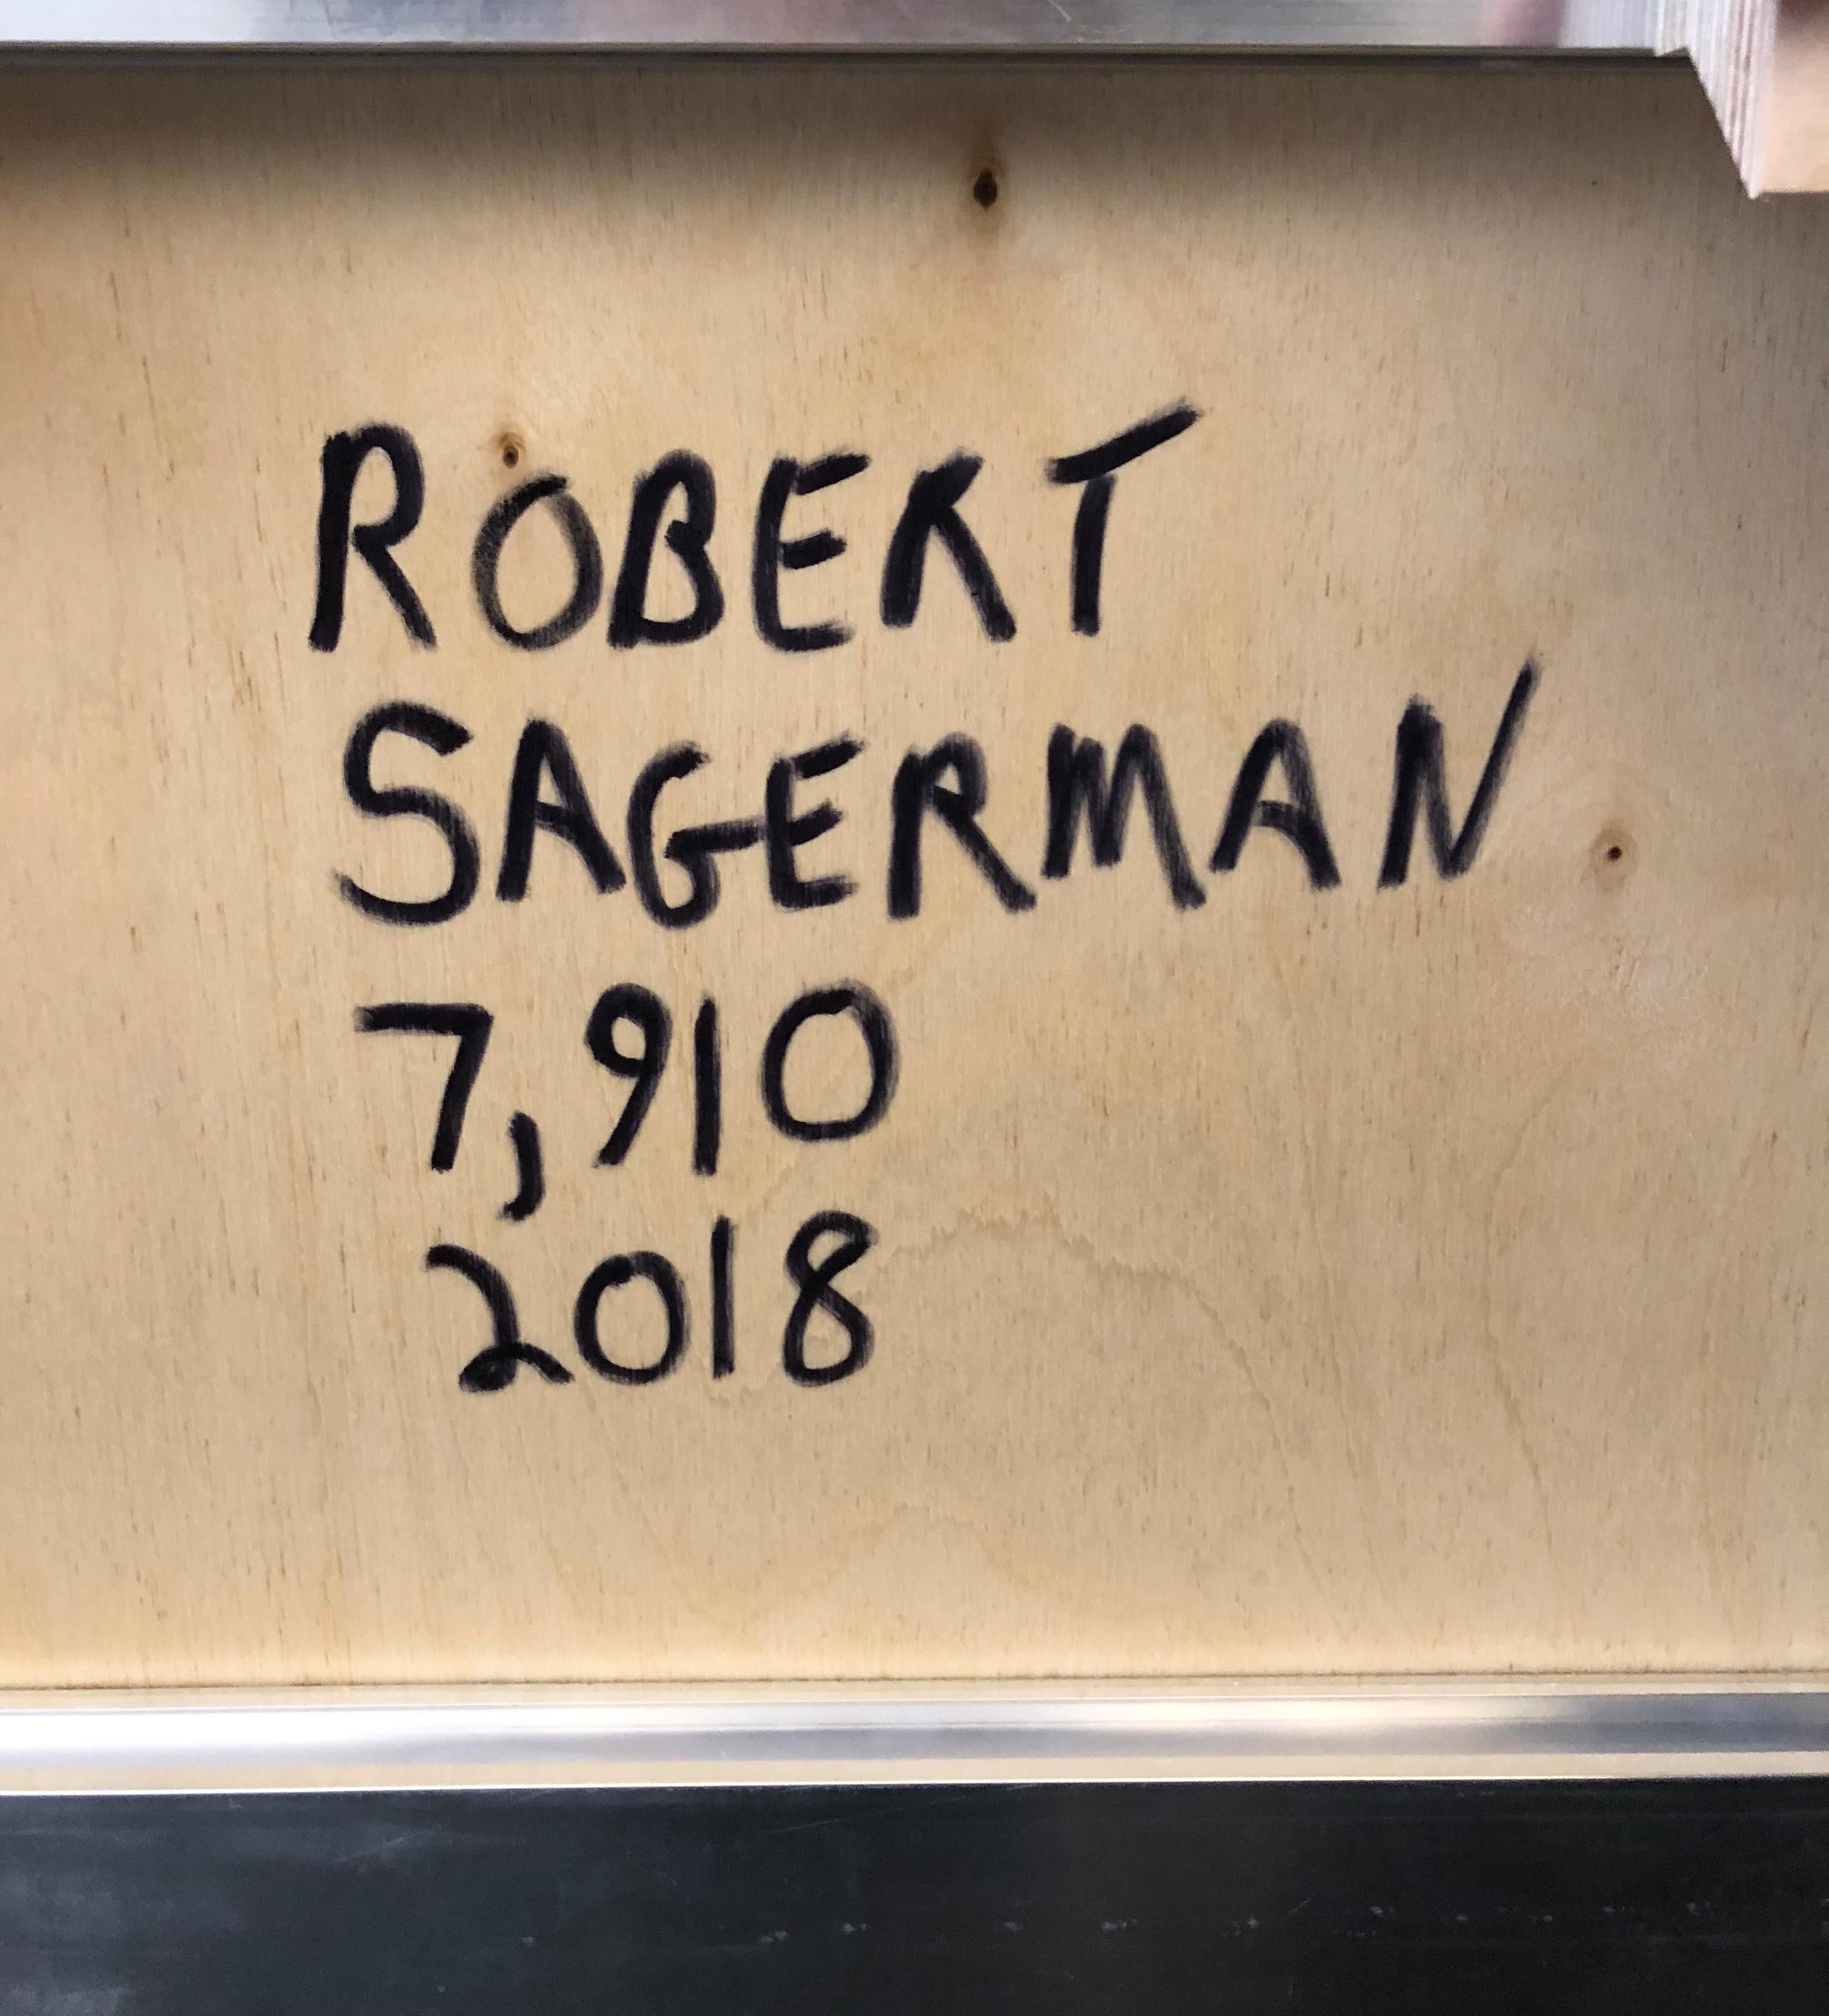 Merging painting, sculpture, and Jewish mysticism, Robert Sagerman approaches each one of his textured, abstract compositions as an act of devotion. He begins by creating his own rich mixtures of oil paint, which he squeezes in individual dabs